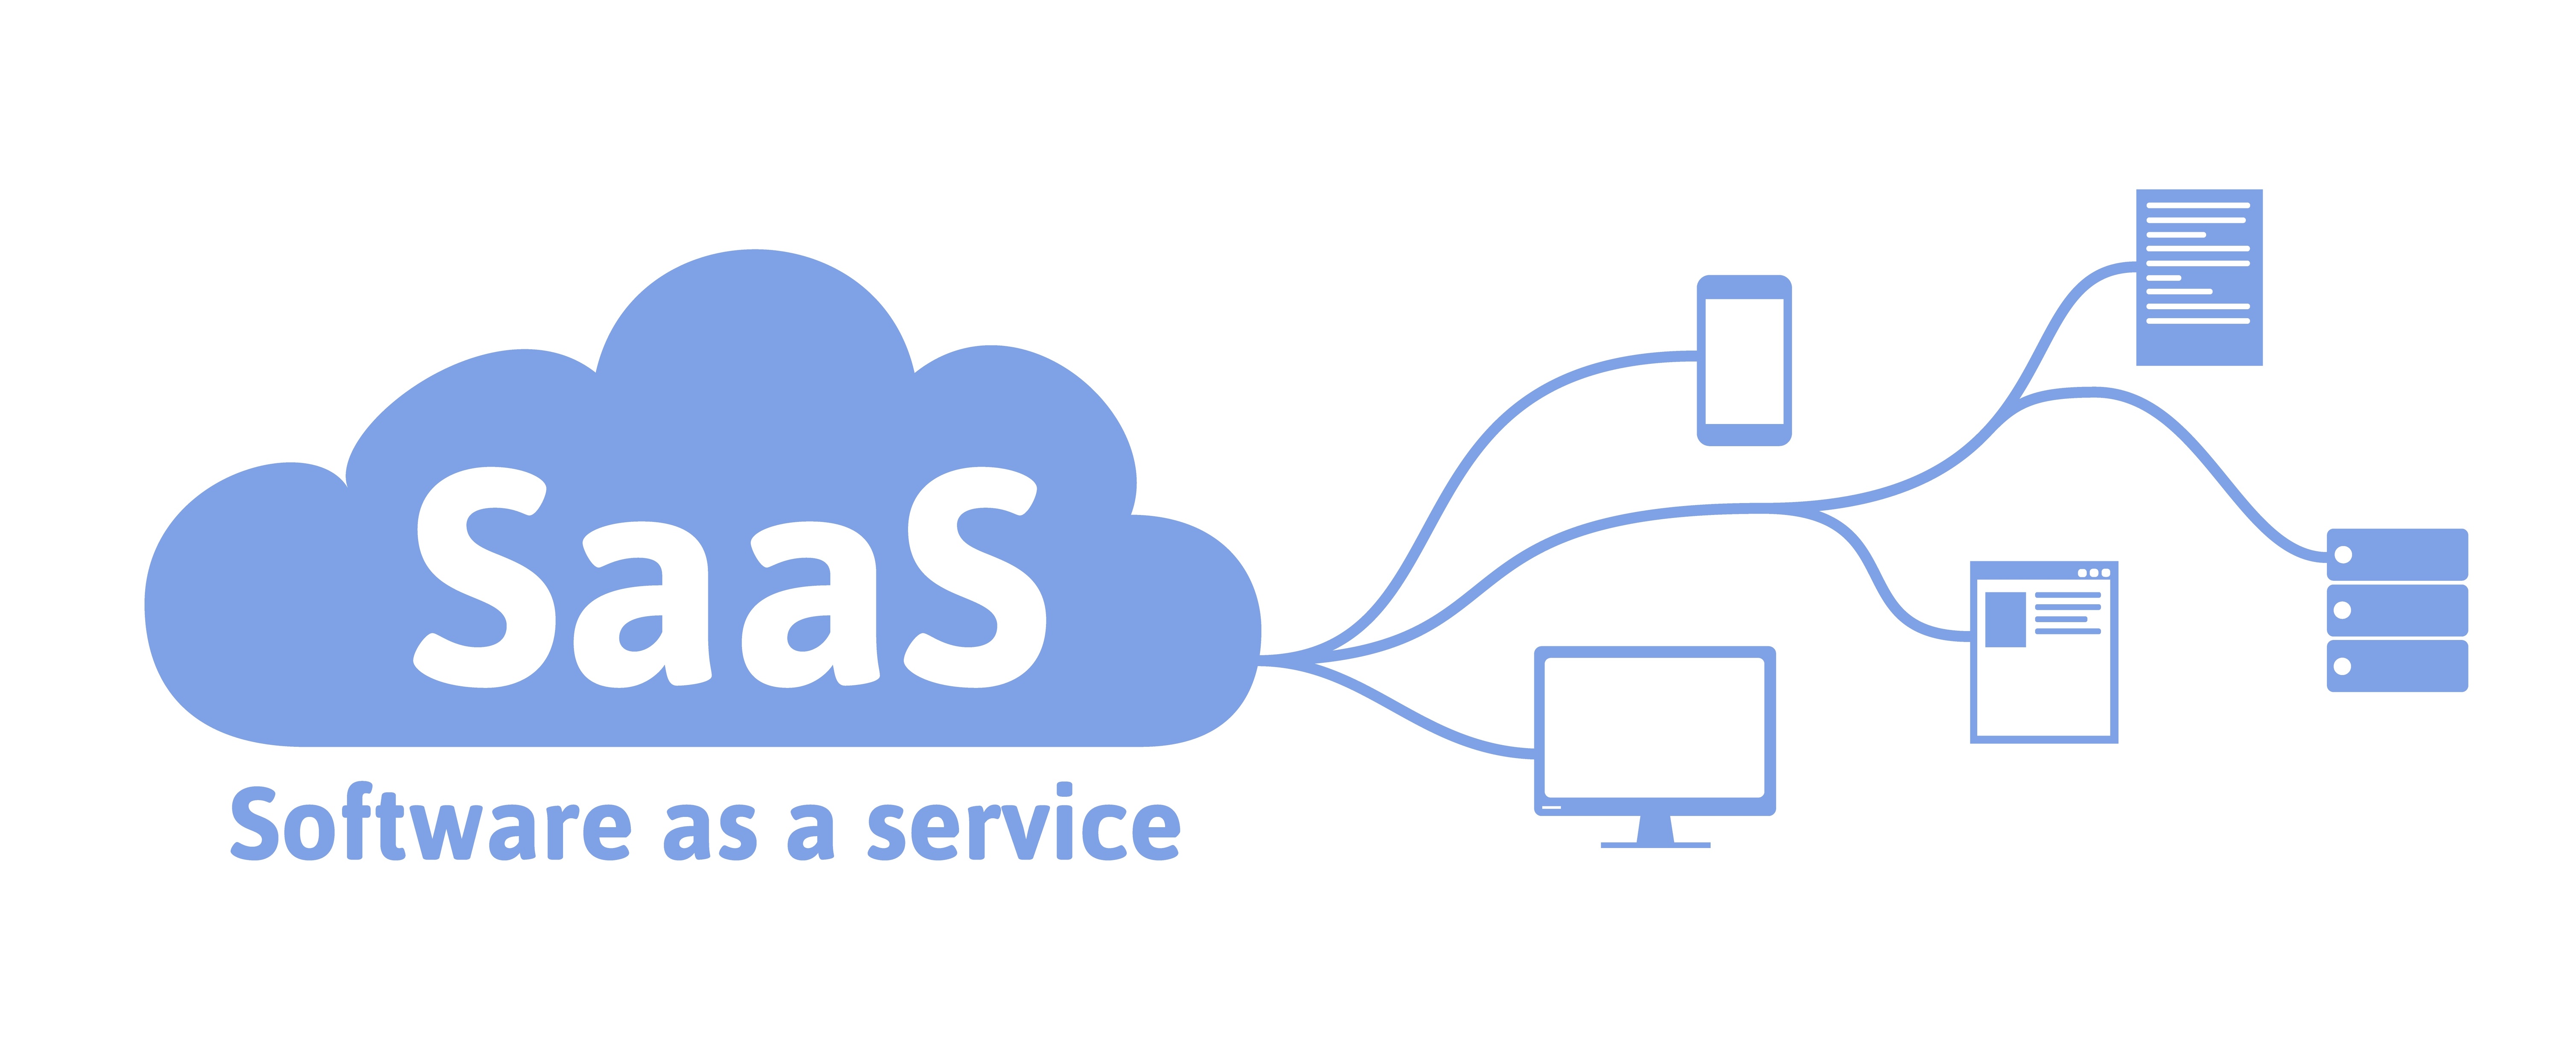 SaaS graphic showing how software as a service connects users across devices